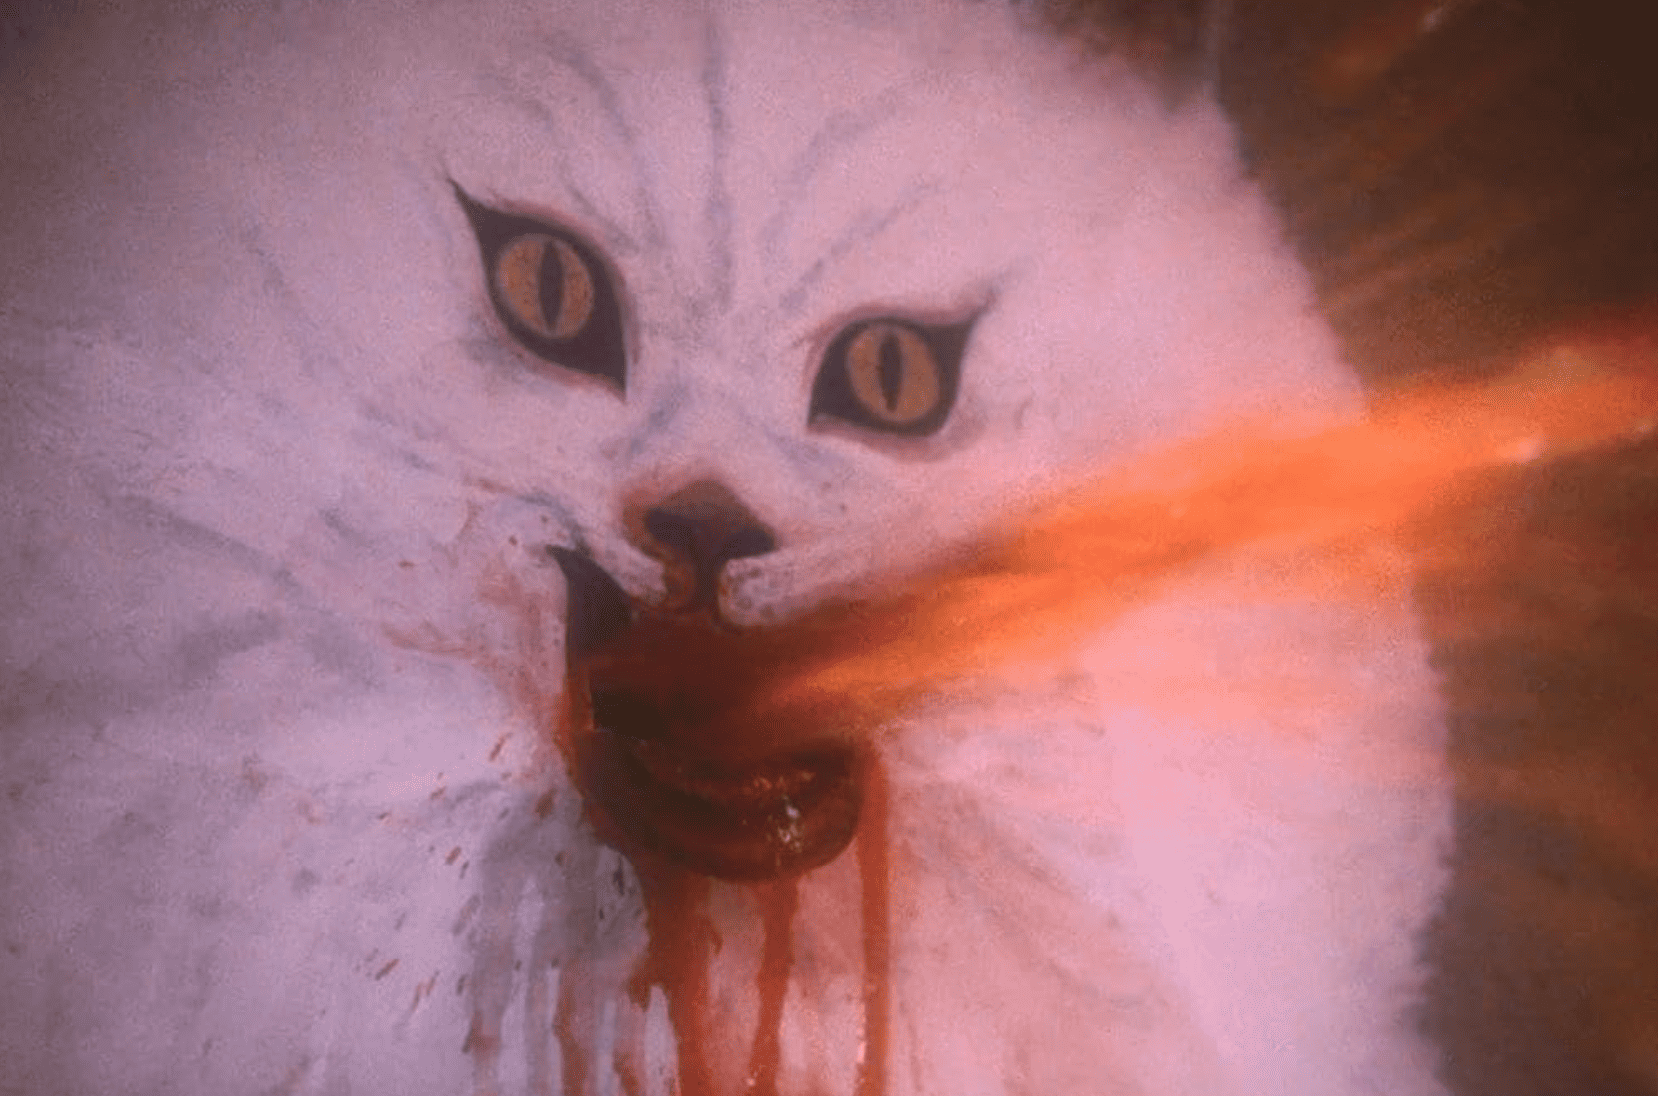 A wall painting of a cat spurts out what appears to be blood in this image from TSC.